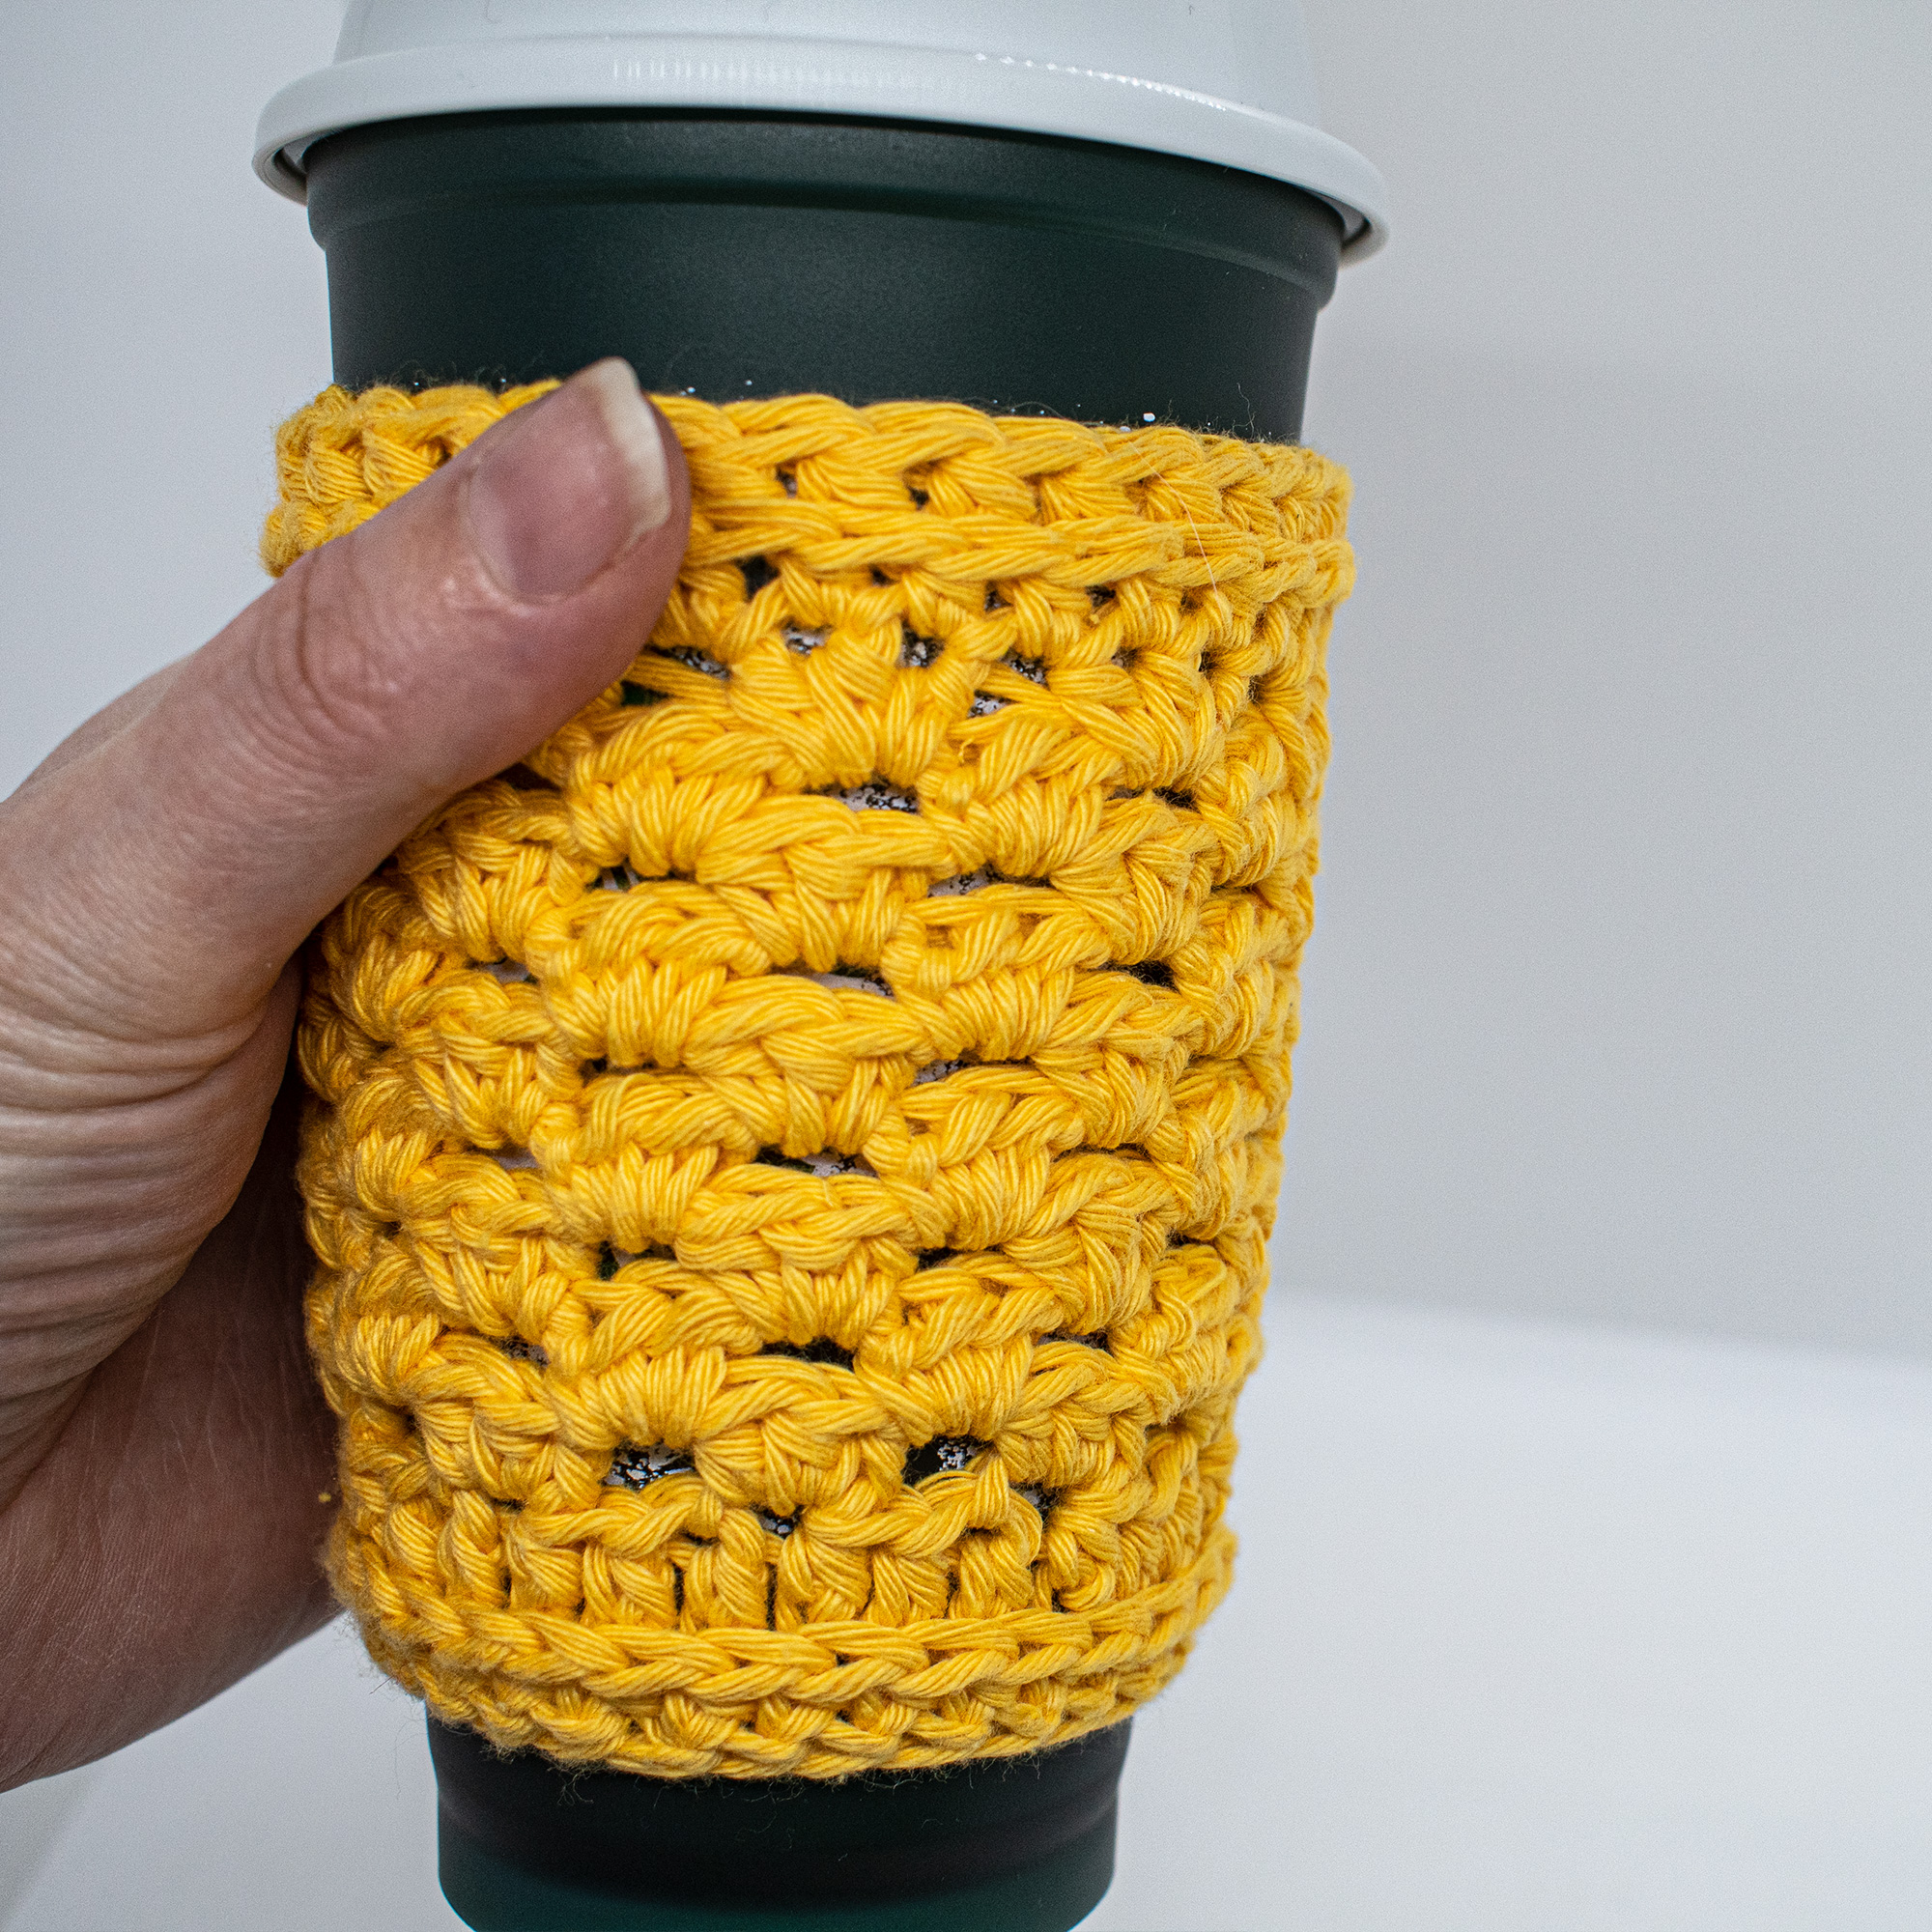 This easy cup cozy crochet pattern works up quickly